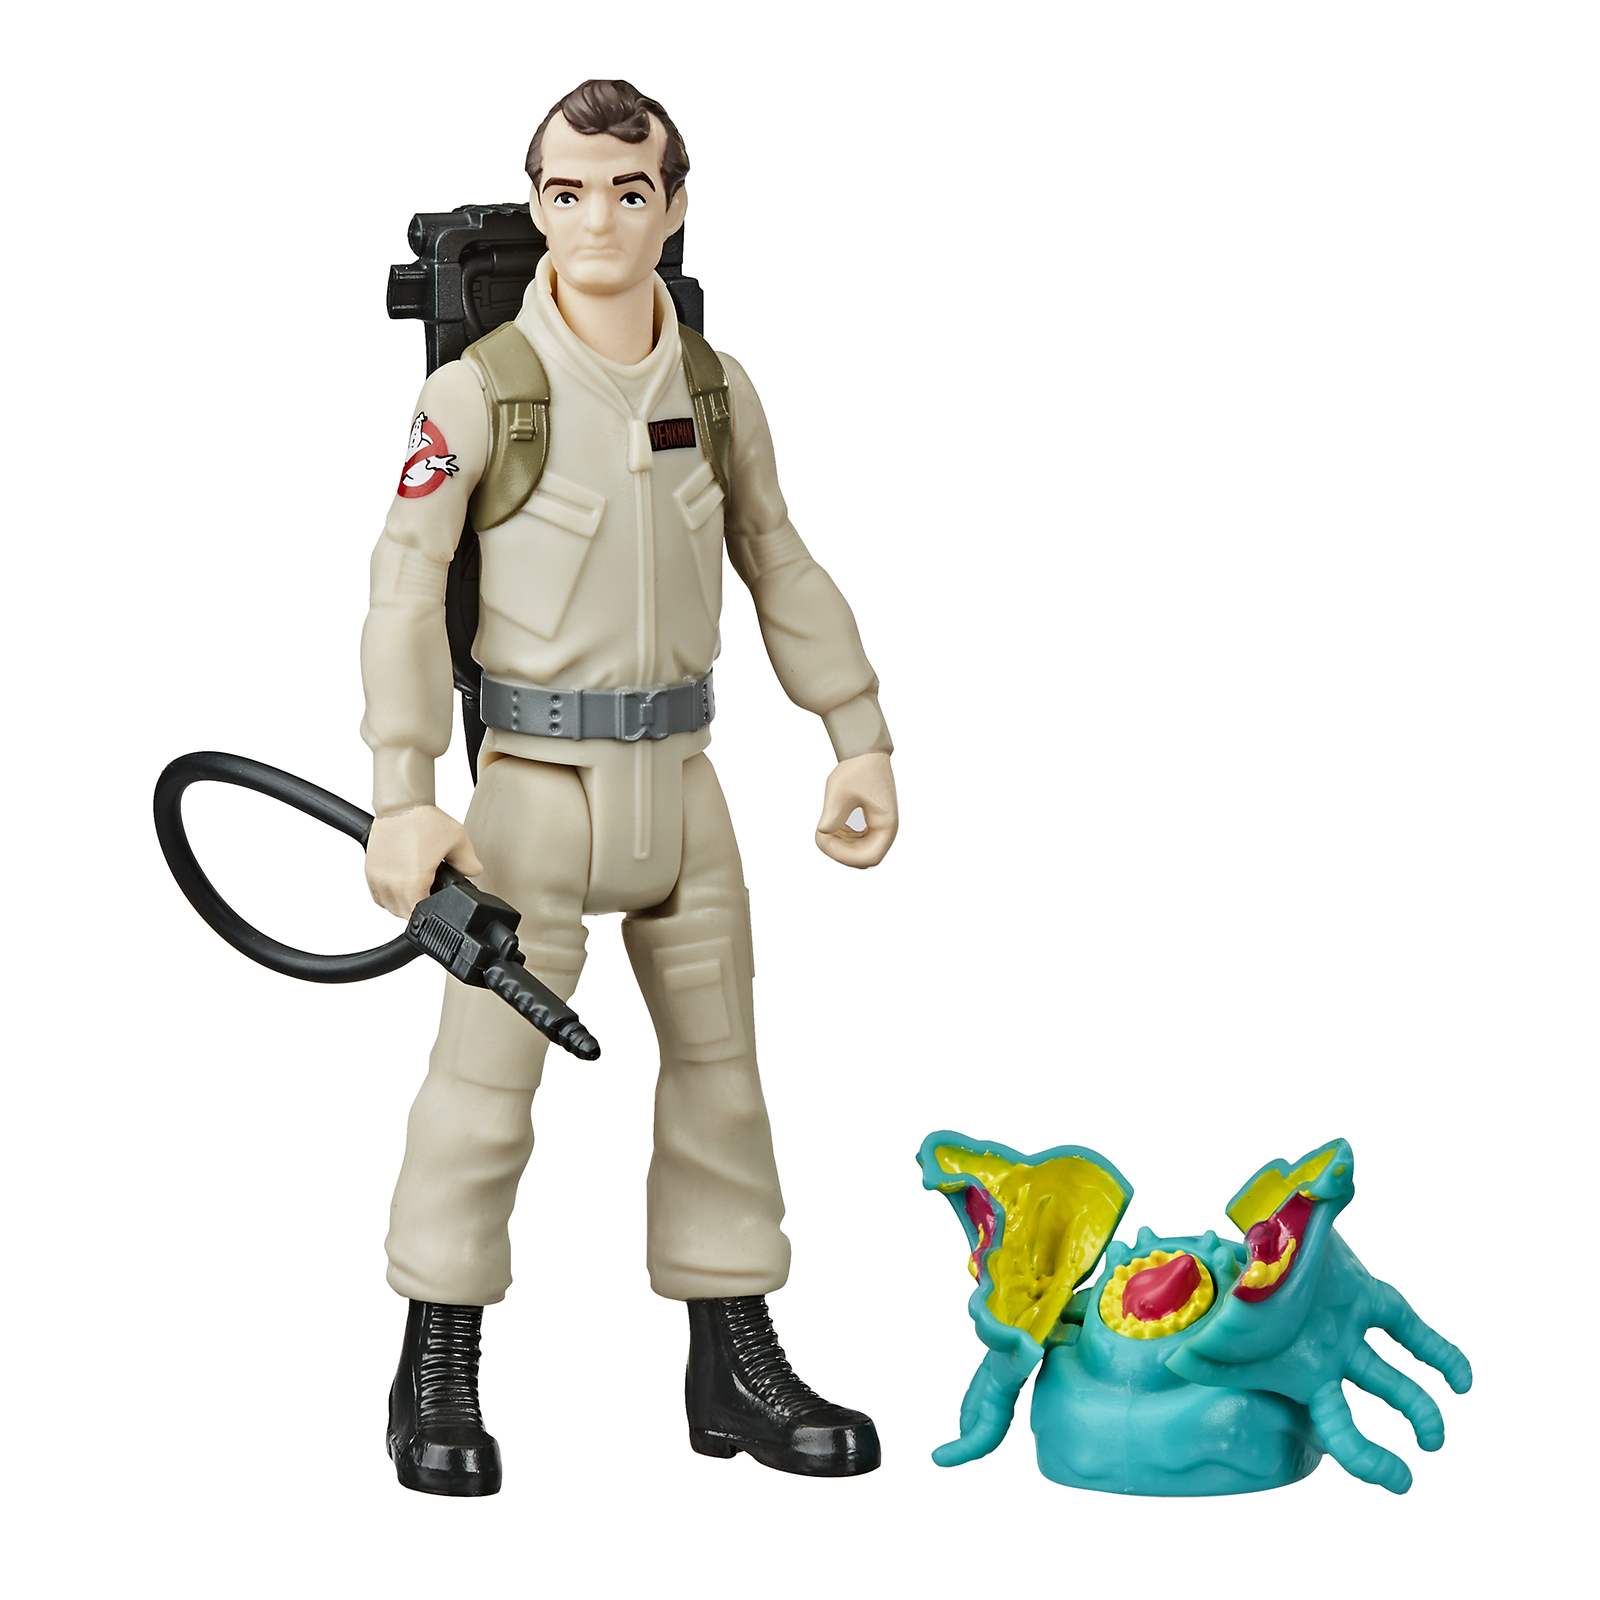 Ghostbusters at Toy Fair 2021 So much ghost busting The 